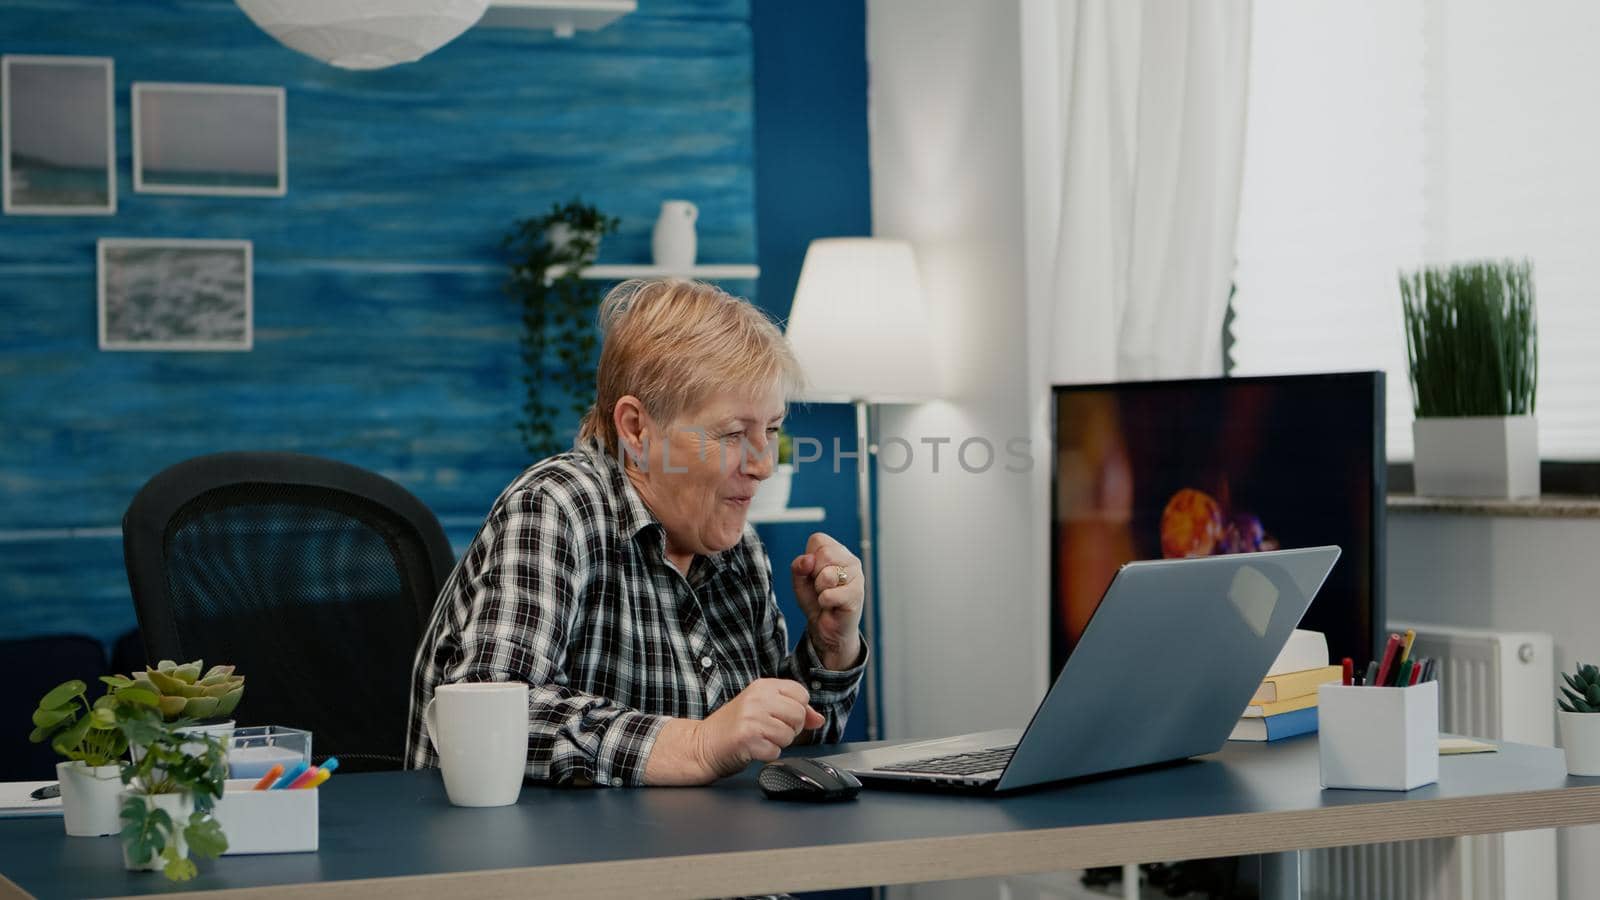 Old woman receving good news on laptop working from home sitting in living room. Enthusiastic senior employee using modern technology reading typing, searching while senior husband sitting on couch